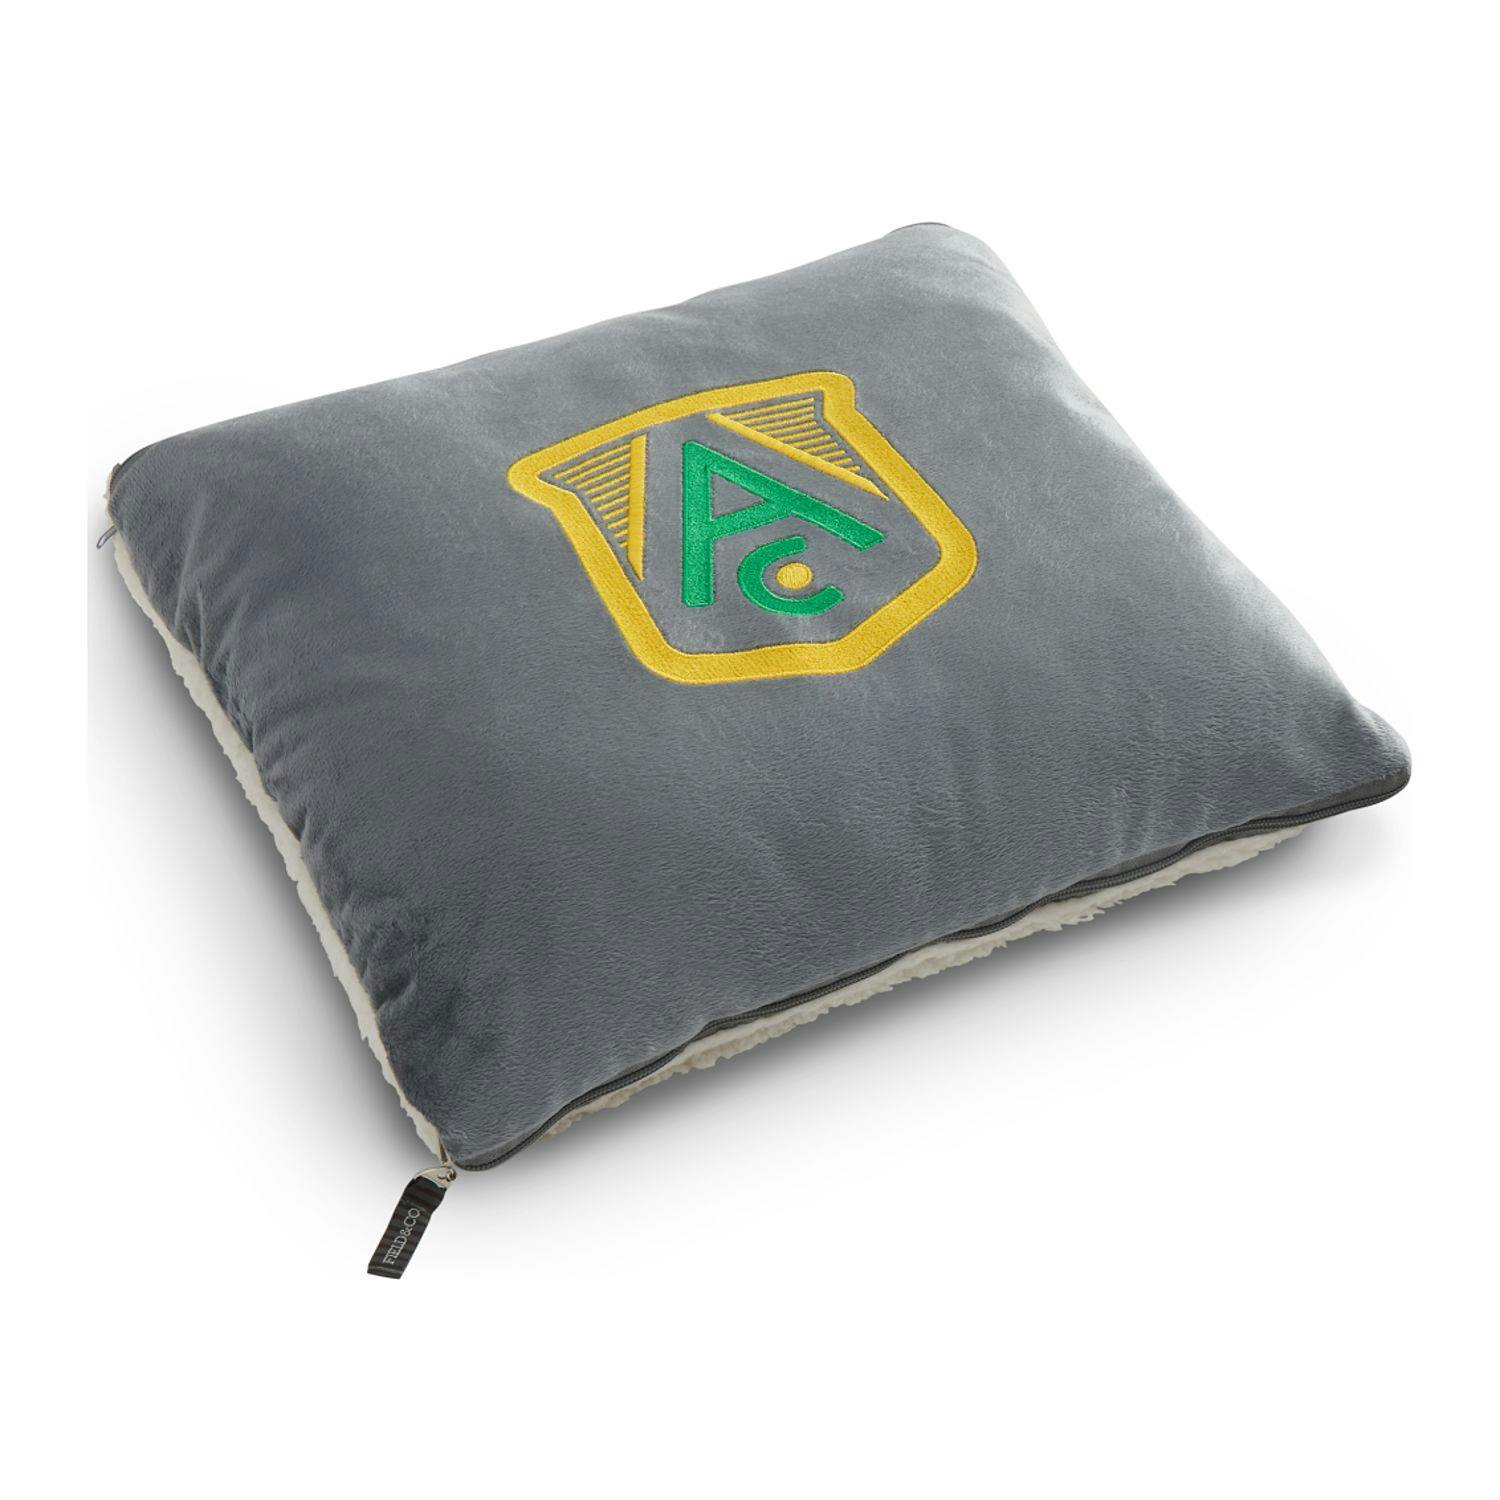 Field & Co. Sherpa Convertible on the Go Blanket - additional Image 1